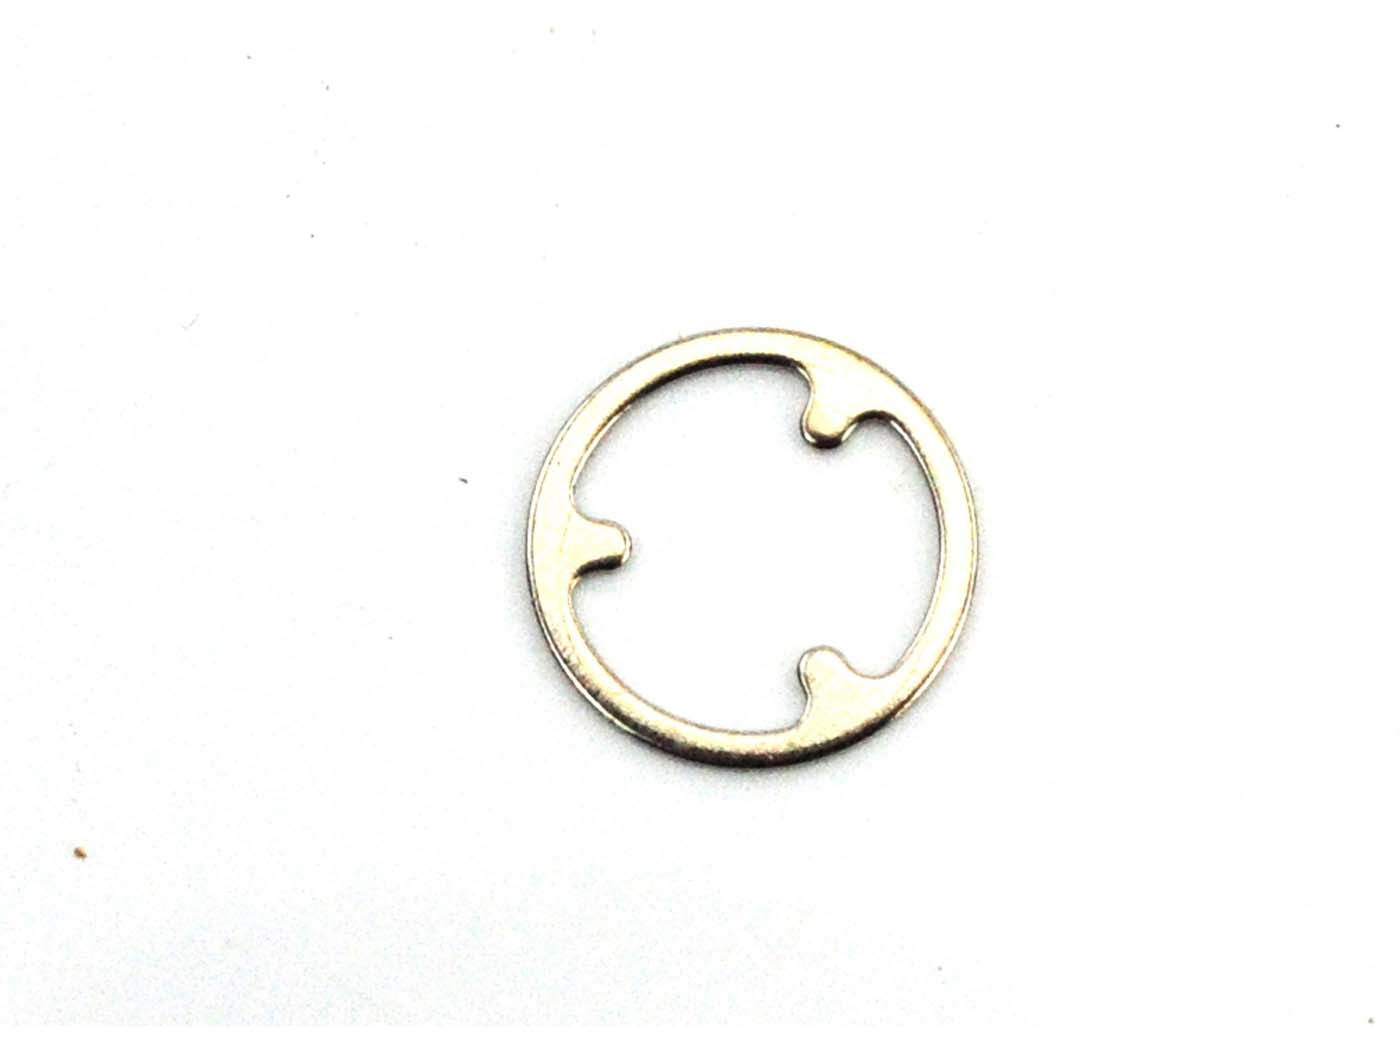 Washer Jet Needle For Bing Carburetor Type SRE For Zündapp Automatic Moped 444, Zündapp 517, Zündapp 517-30 LA, Zündapp Moped Type 447, Zündapp Type 447, Zündapp Type 446, Puch Maxi, Puch Maxi Denmark, Sachs 503 Switzerland, Puch M 50 Racing, Puch X